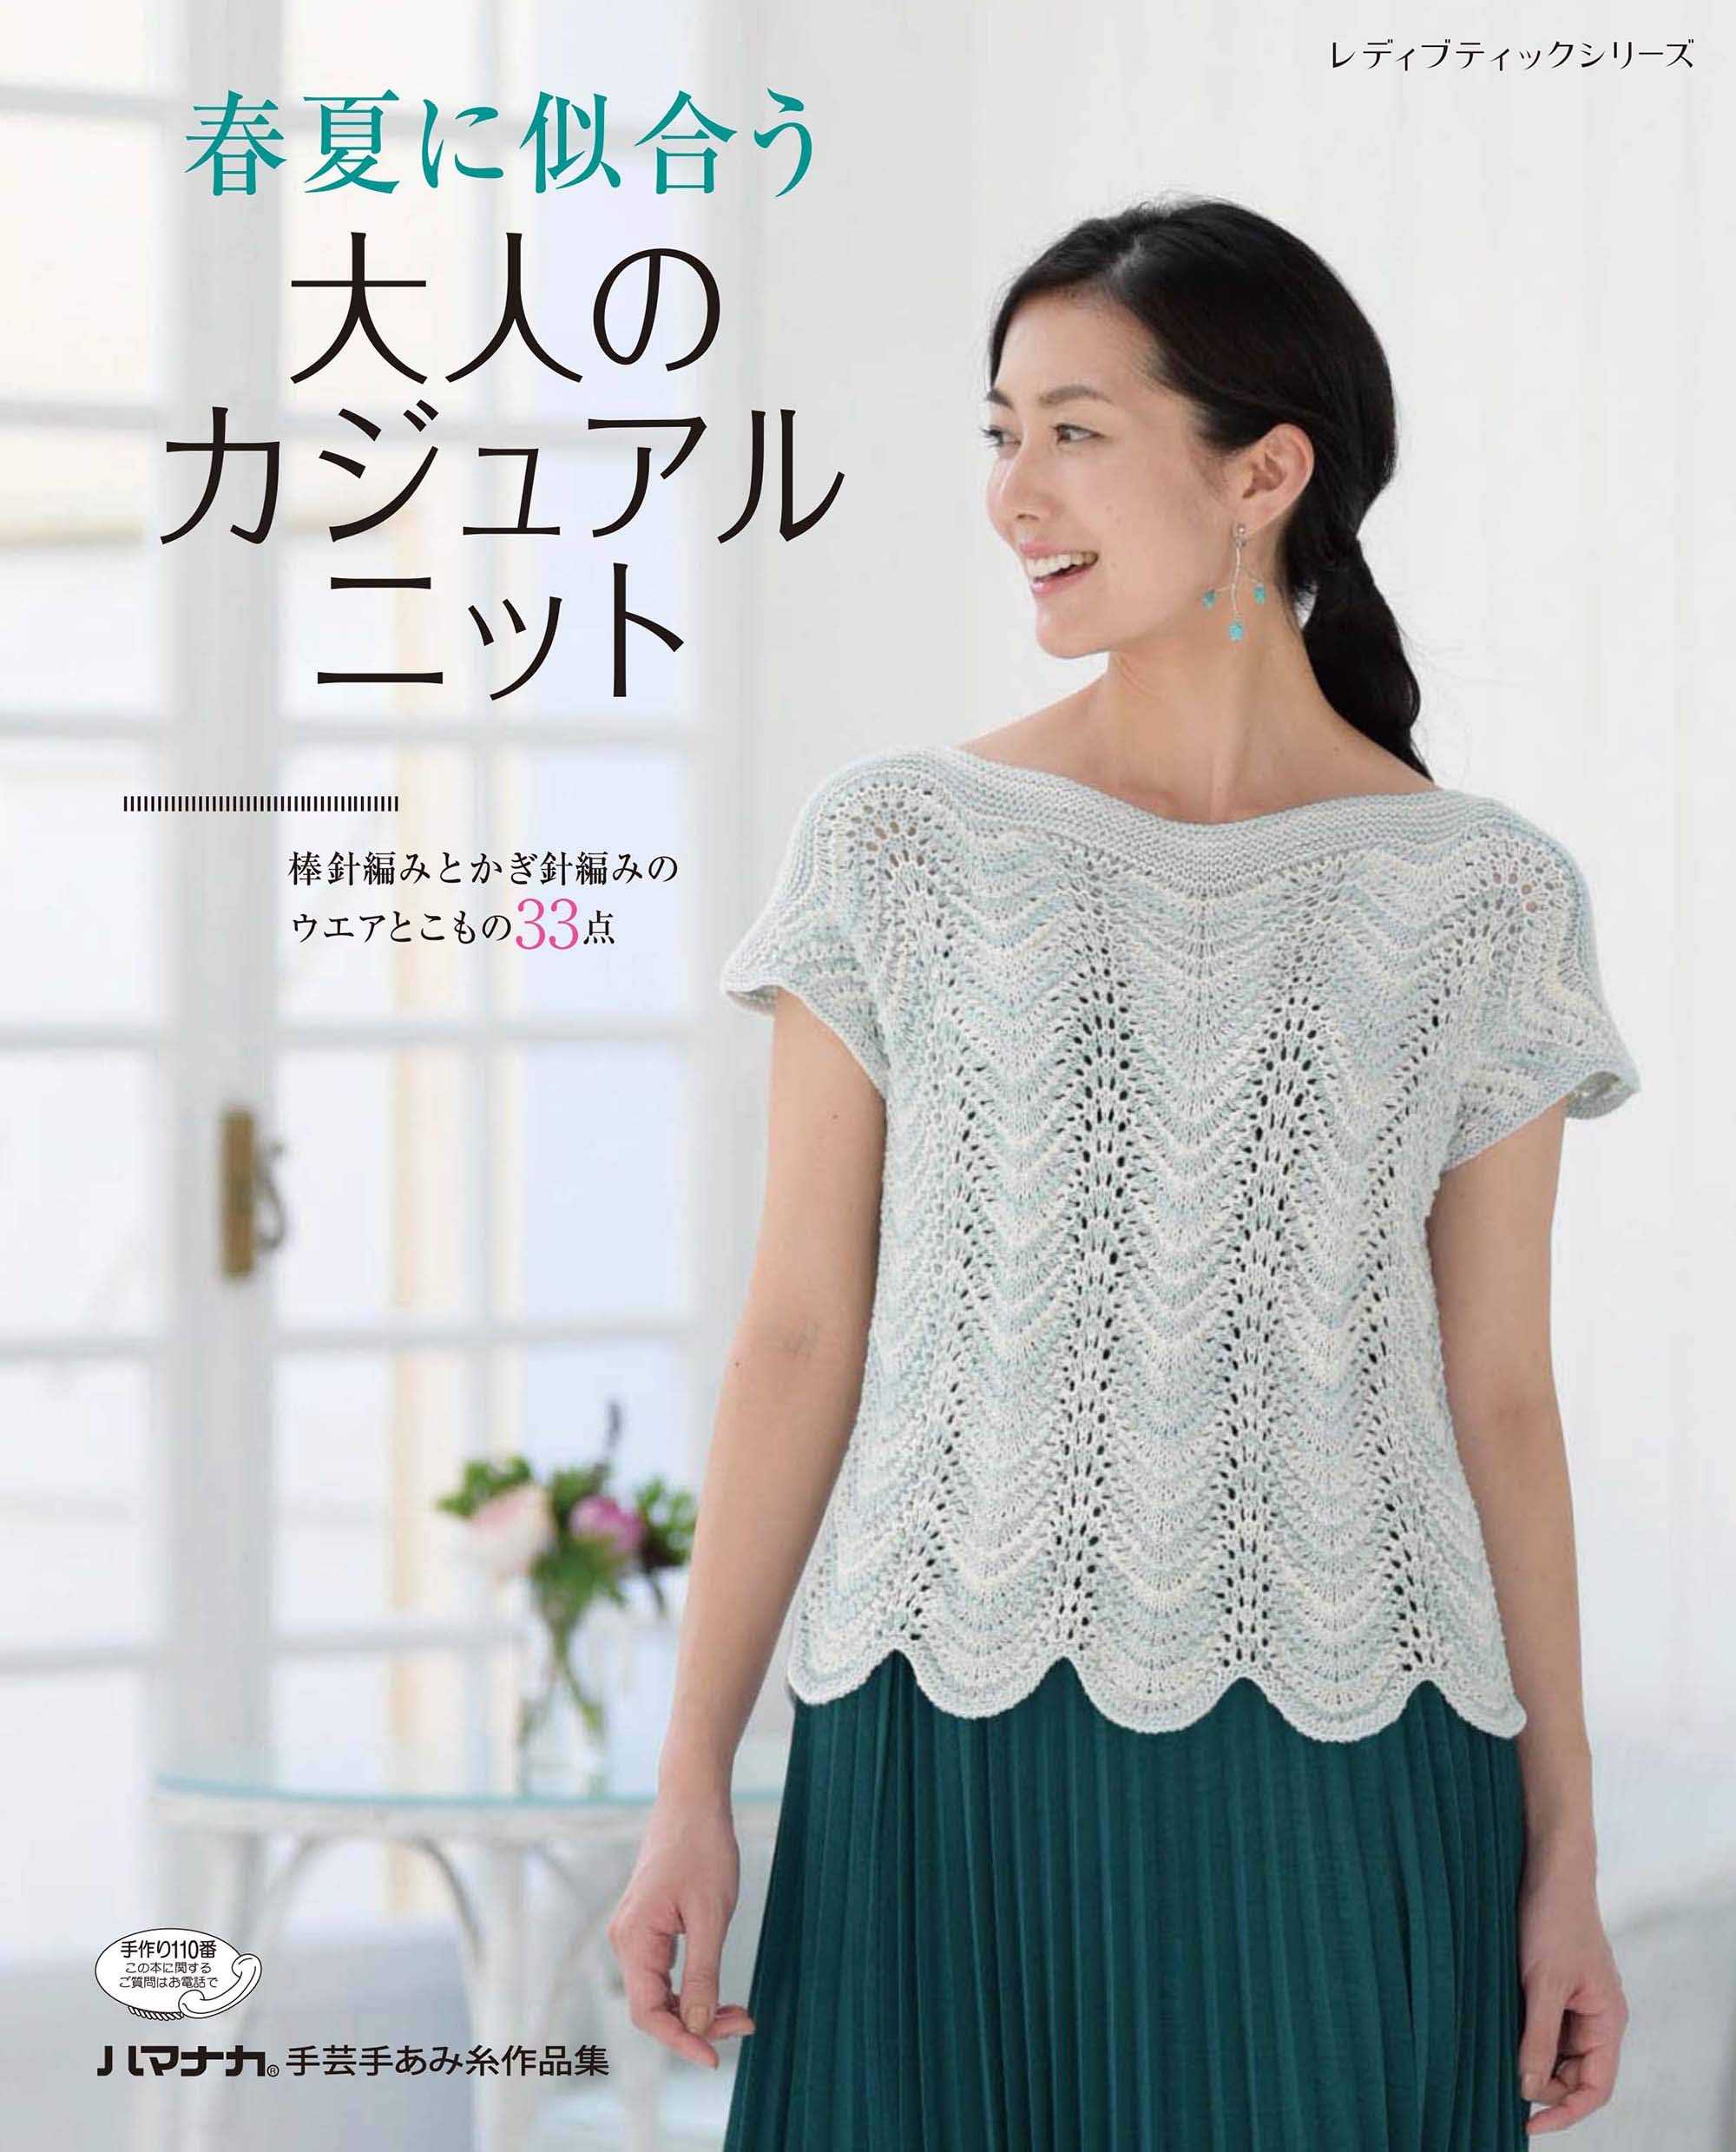 Adult casual knitting suits for spring and summer